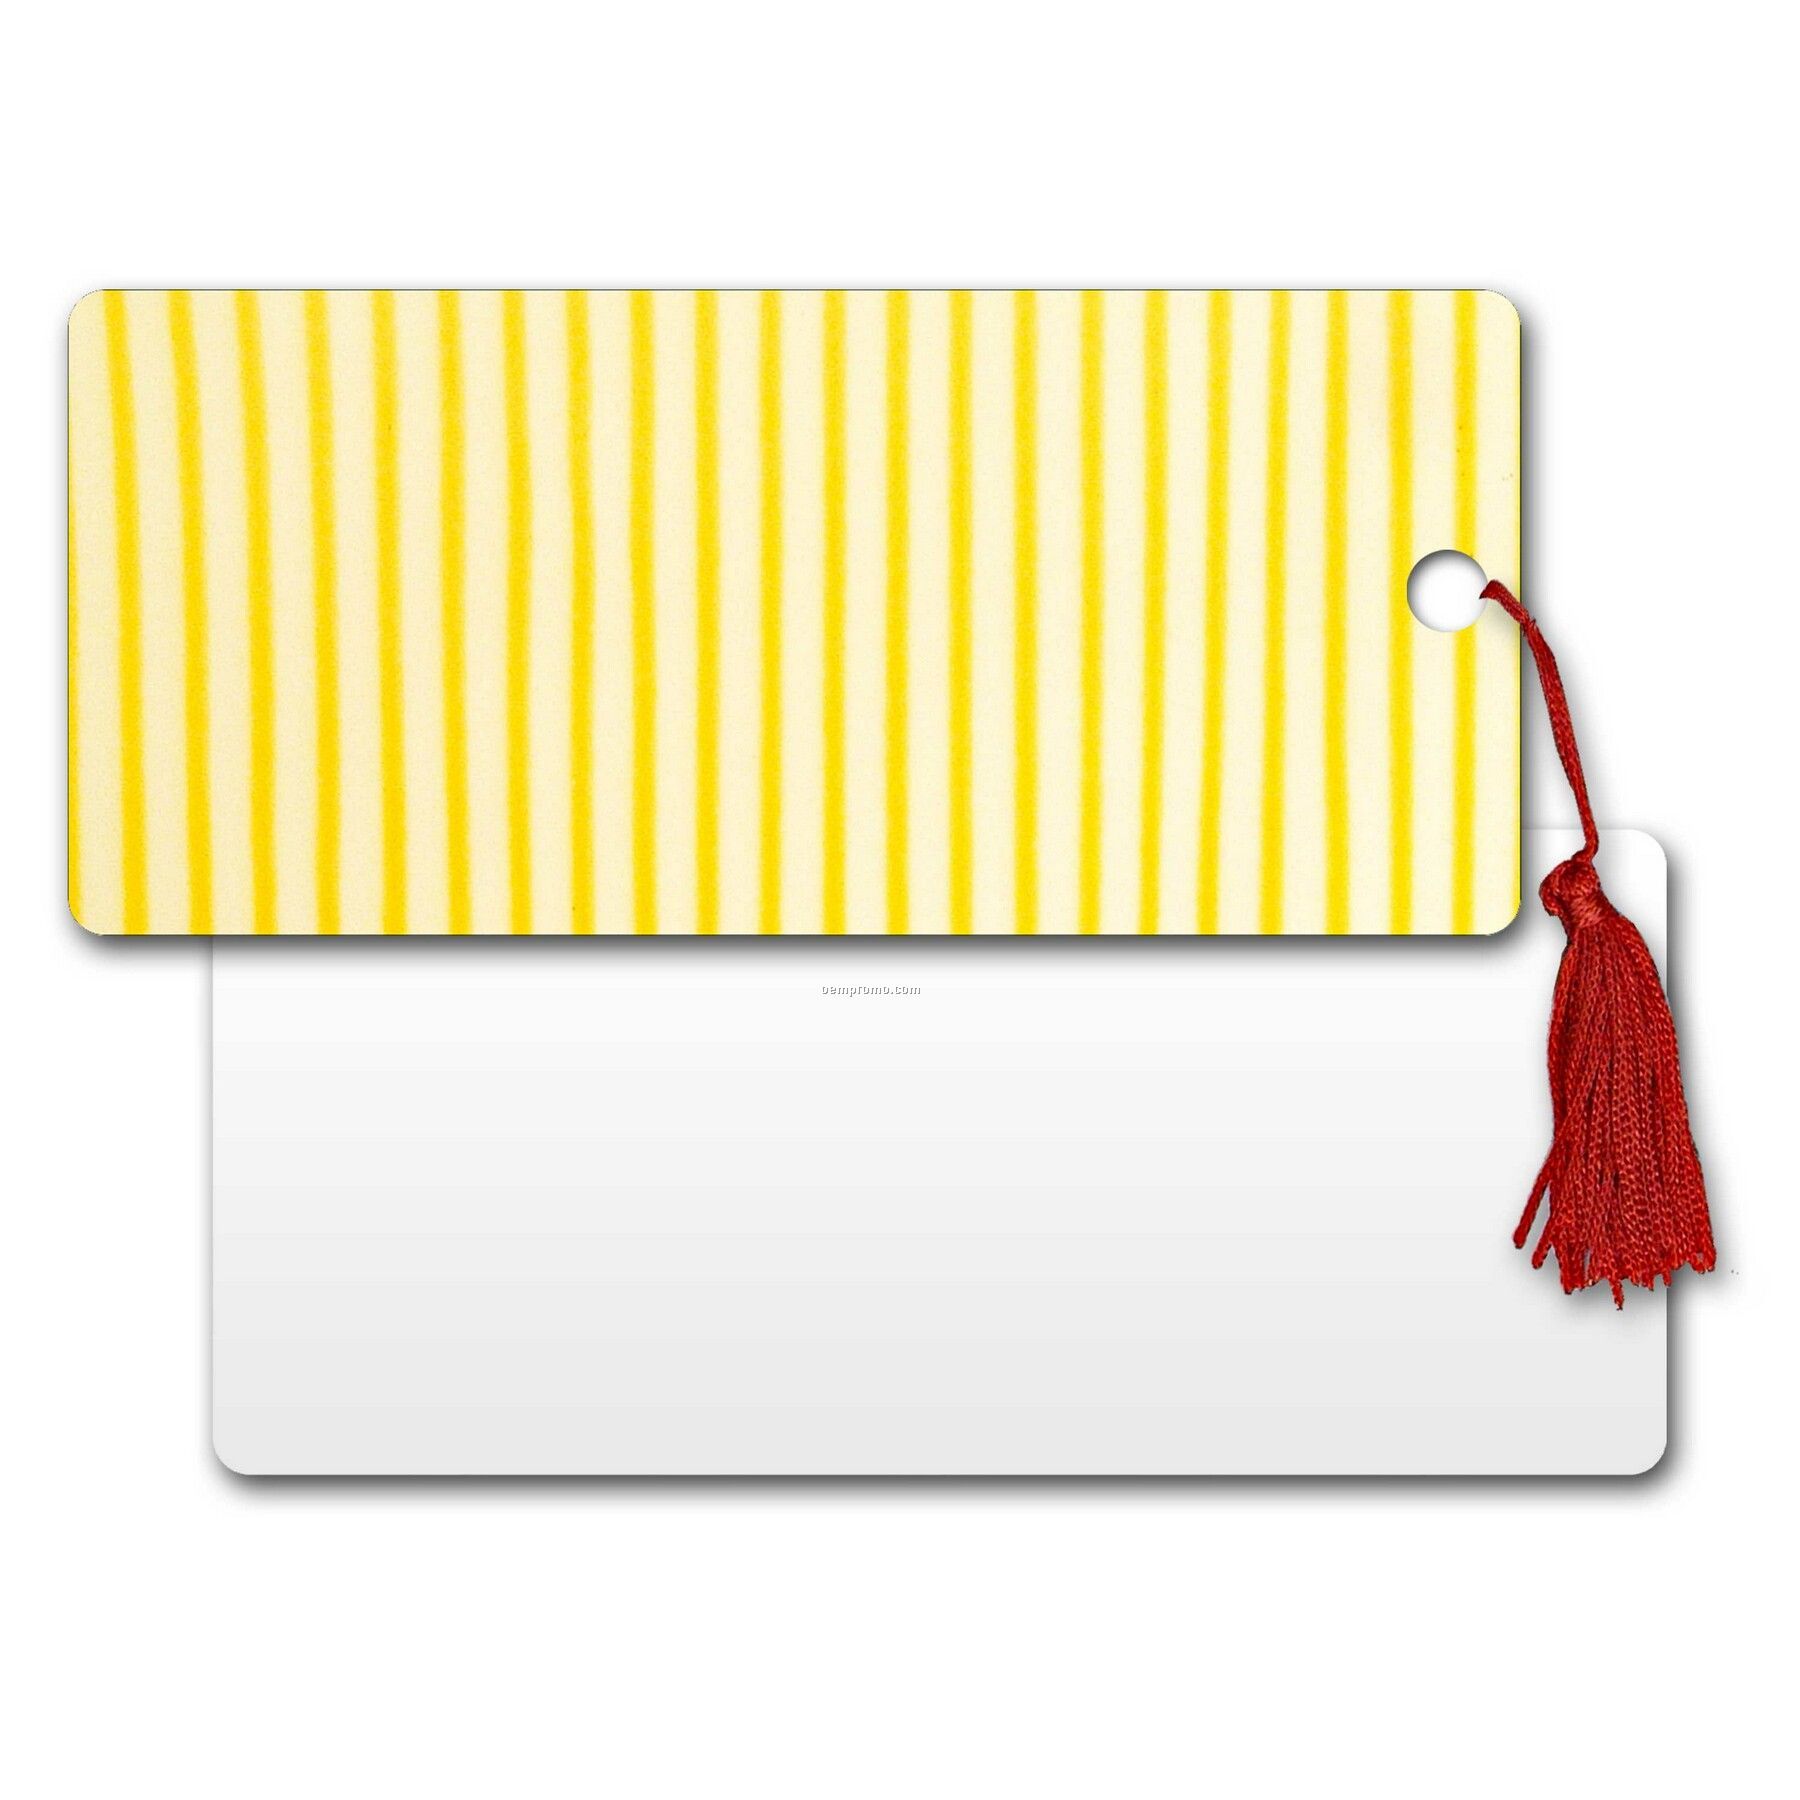 Pvc Bookmark W/3d Lenticular Image Of Yellow / White Stripes (Blanks)